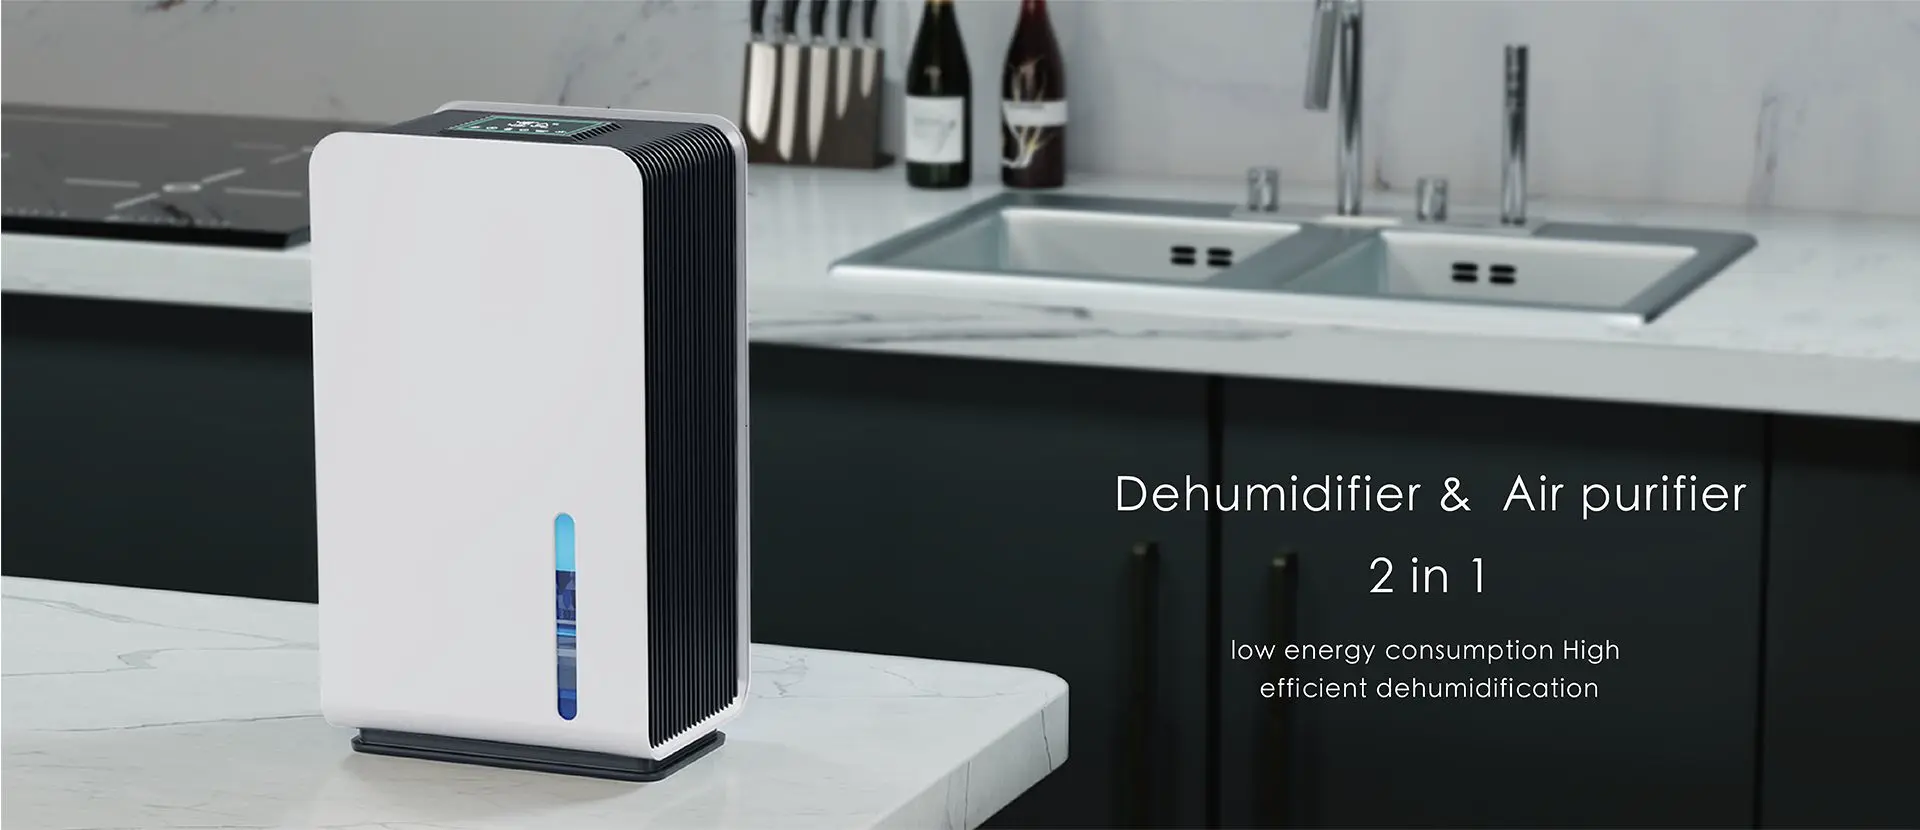 Kooling/coolwhist professional household small dehumidifier manufacturer - dehumidifier and air purifier combo intelligent dehumidifier MD 823